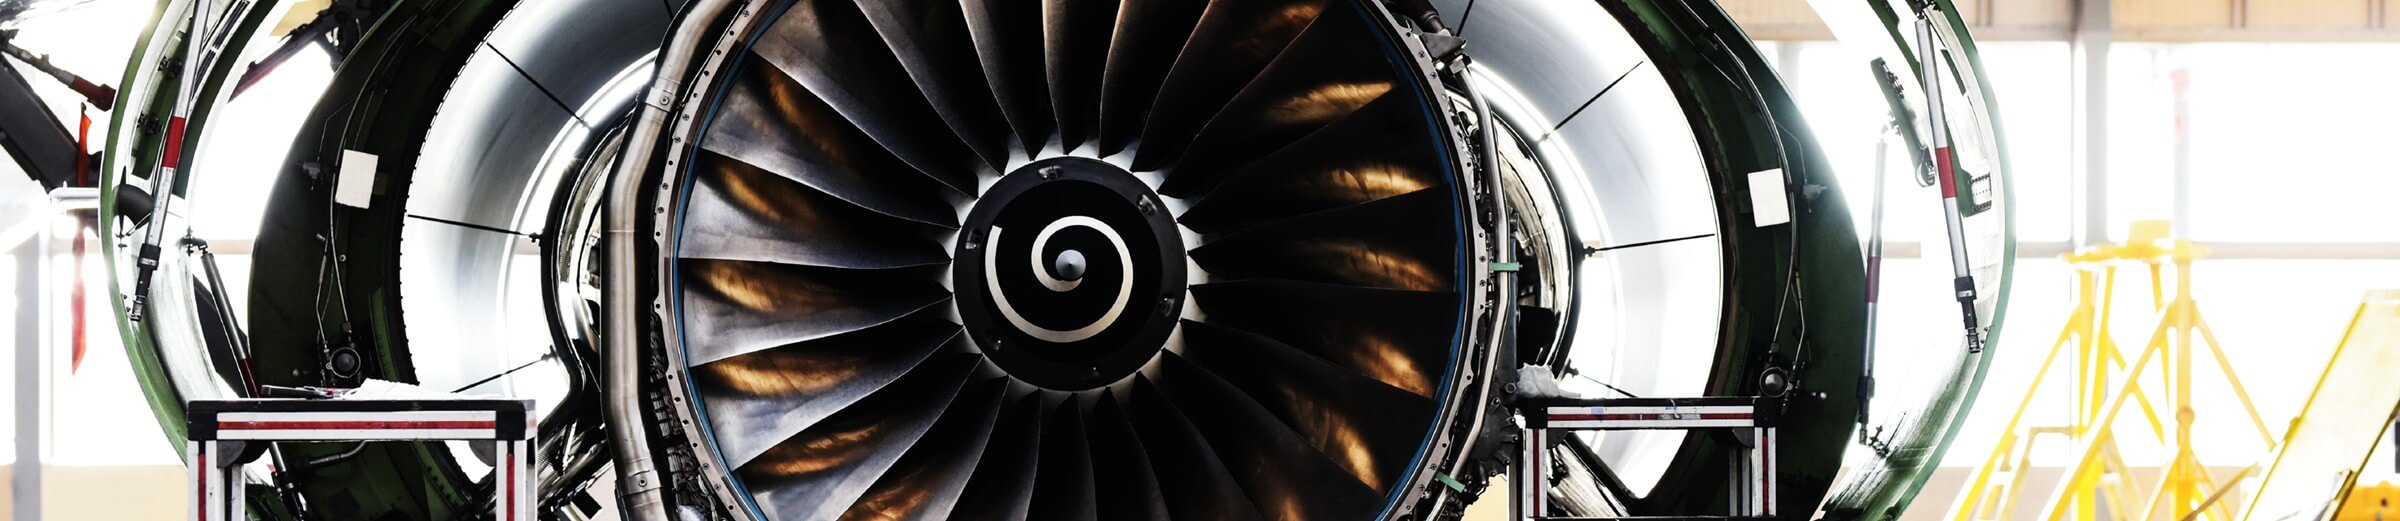 A close-up view of a jet engine reveals its intricate design and metallic surfaces, capturing the essence of modern aviation technology. The engine is partially disassembled, exposing the inner blades that gleam with a polished finish. In the background, a well-lit hangar sets the stage for maintenance or inspection.